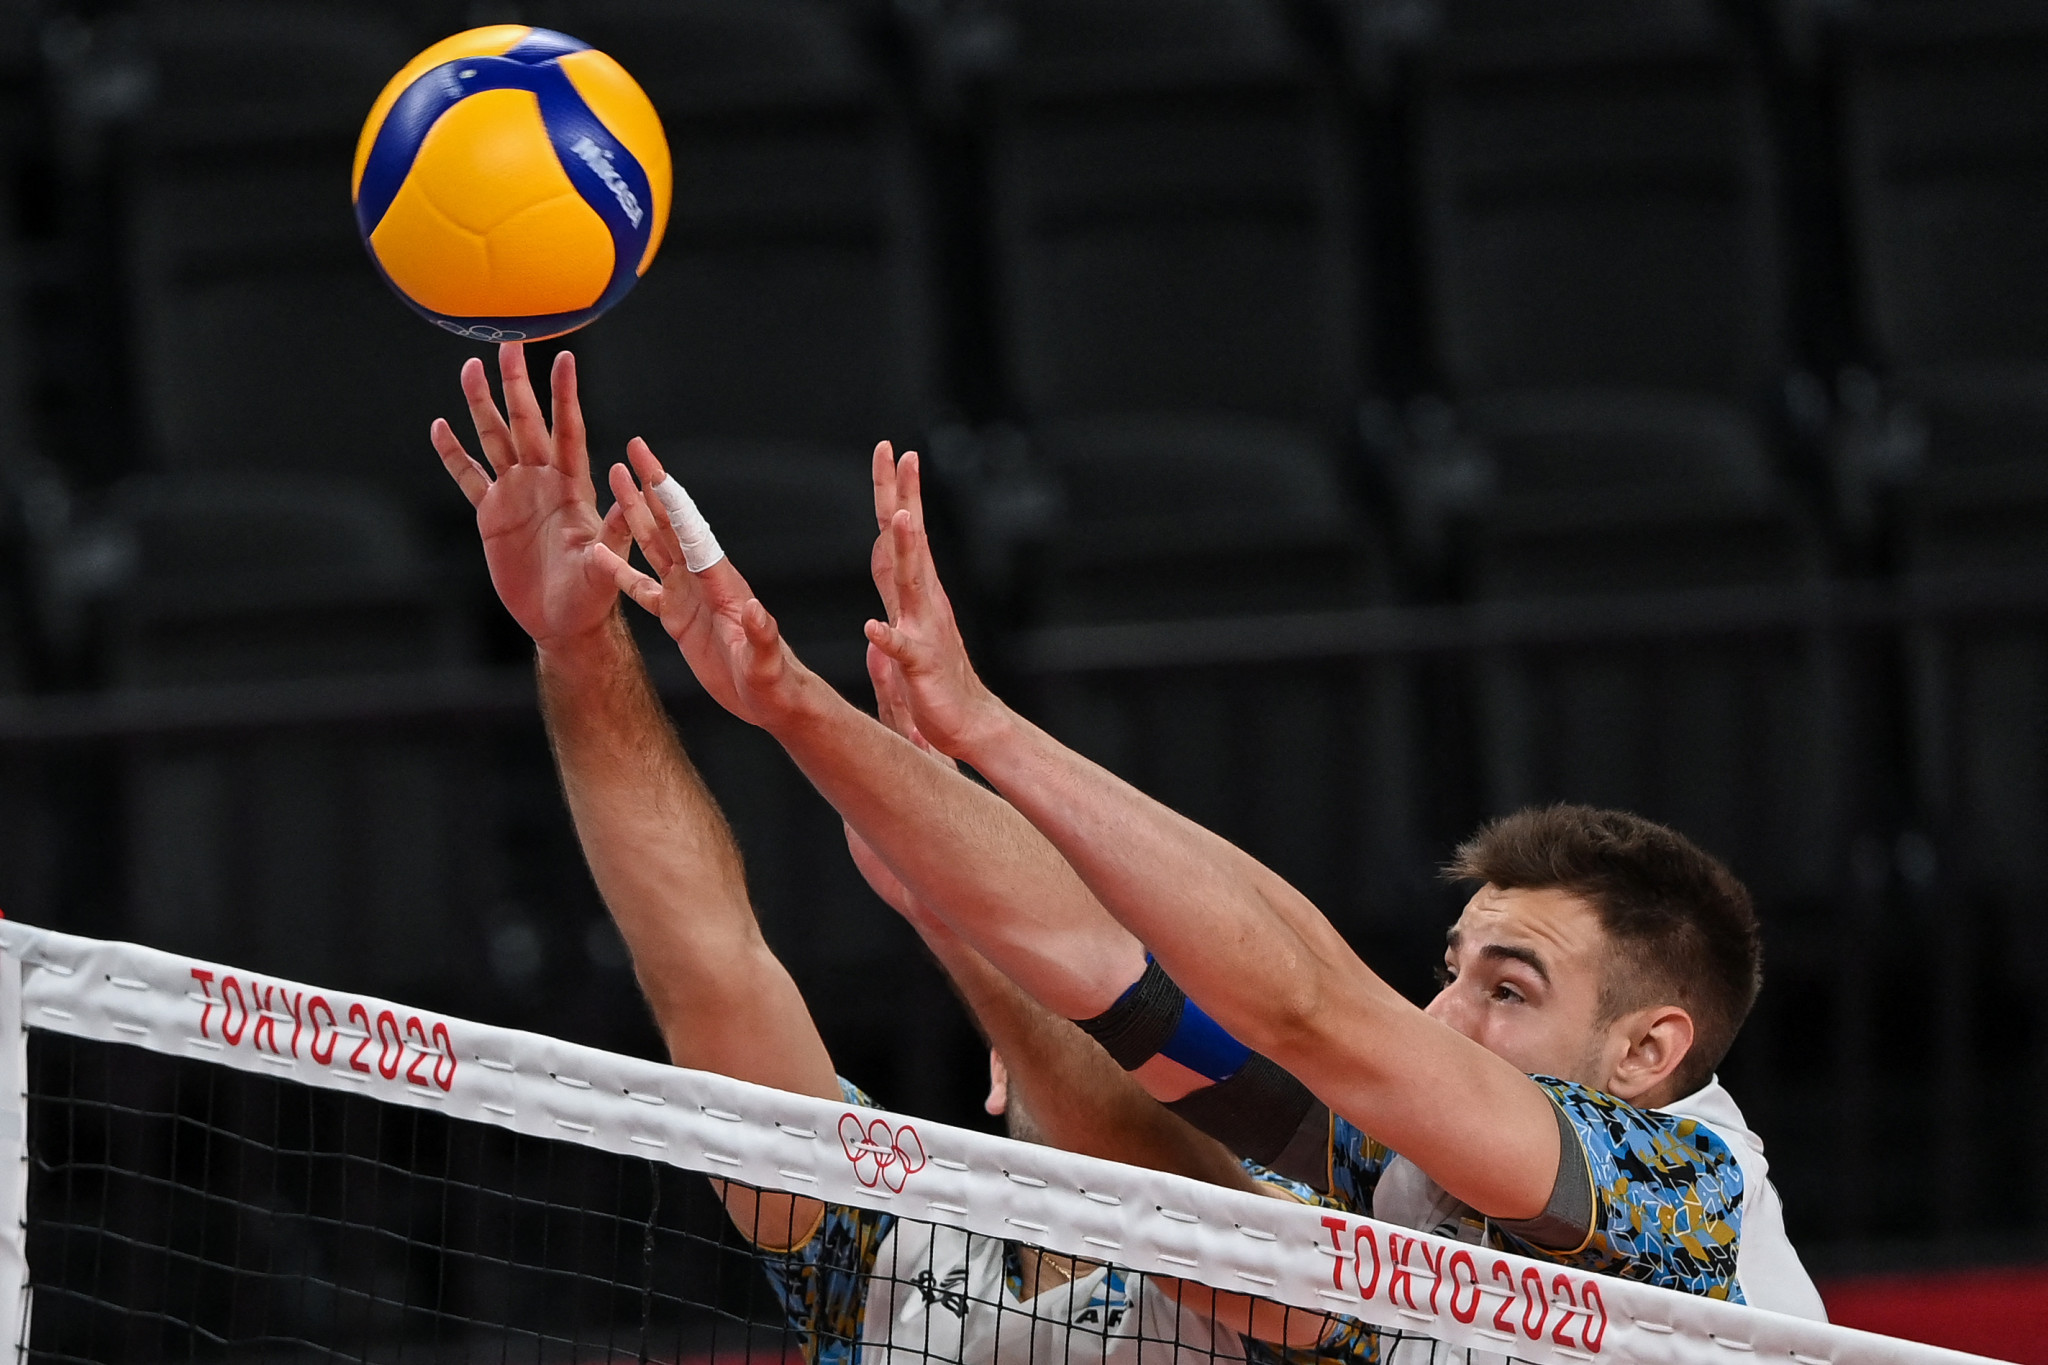 Eighteen teams set to compete in FIVB Boys' U19 World Championship